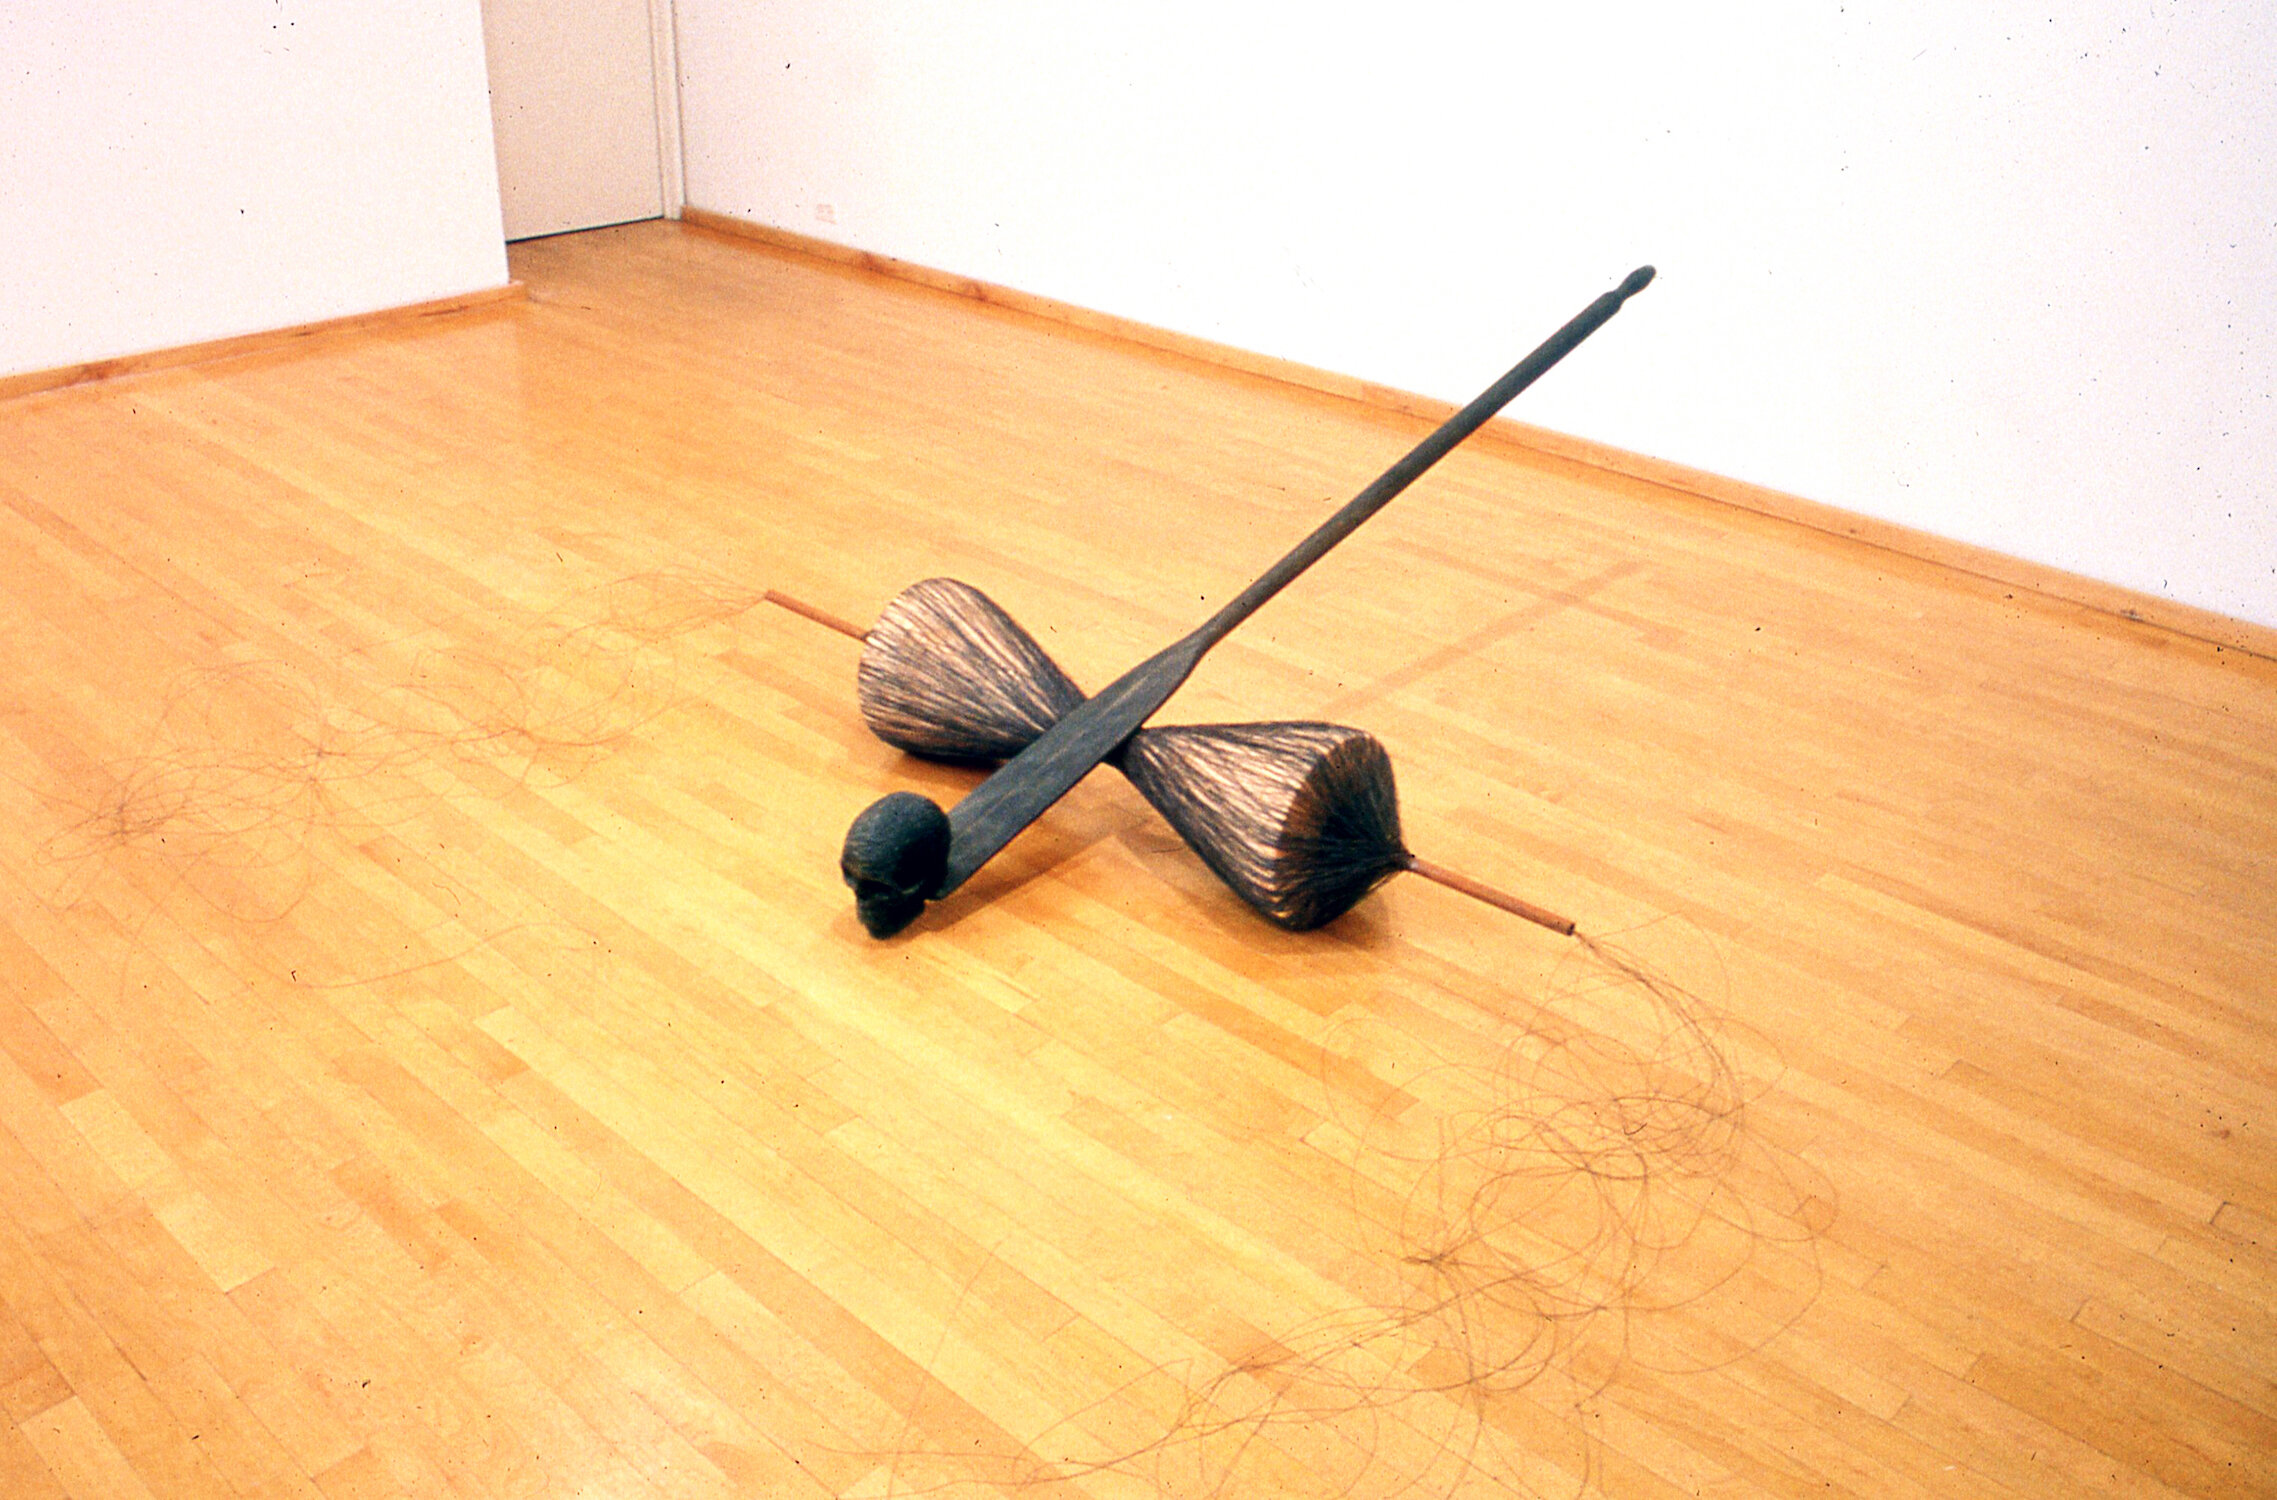  Catapult, 1993, wood, graphite, wire thread, 27 x 81 x 120 inches  Tom Butter’s sculptures of the late ‘70’s and early ‘80’s, eccentric abstractions related to work by John Duff and Eva Hesse, were made of fiberglass. But fiberglass, like abstractio